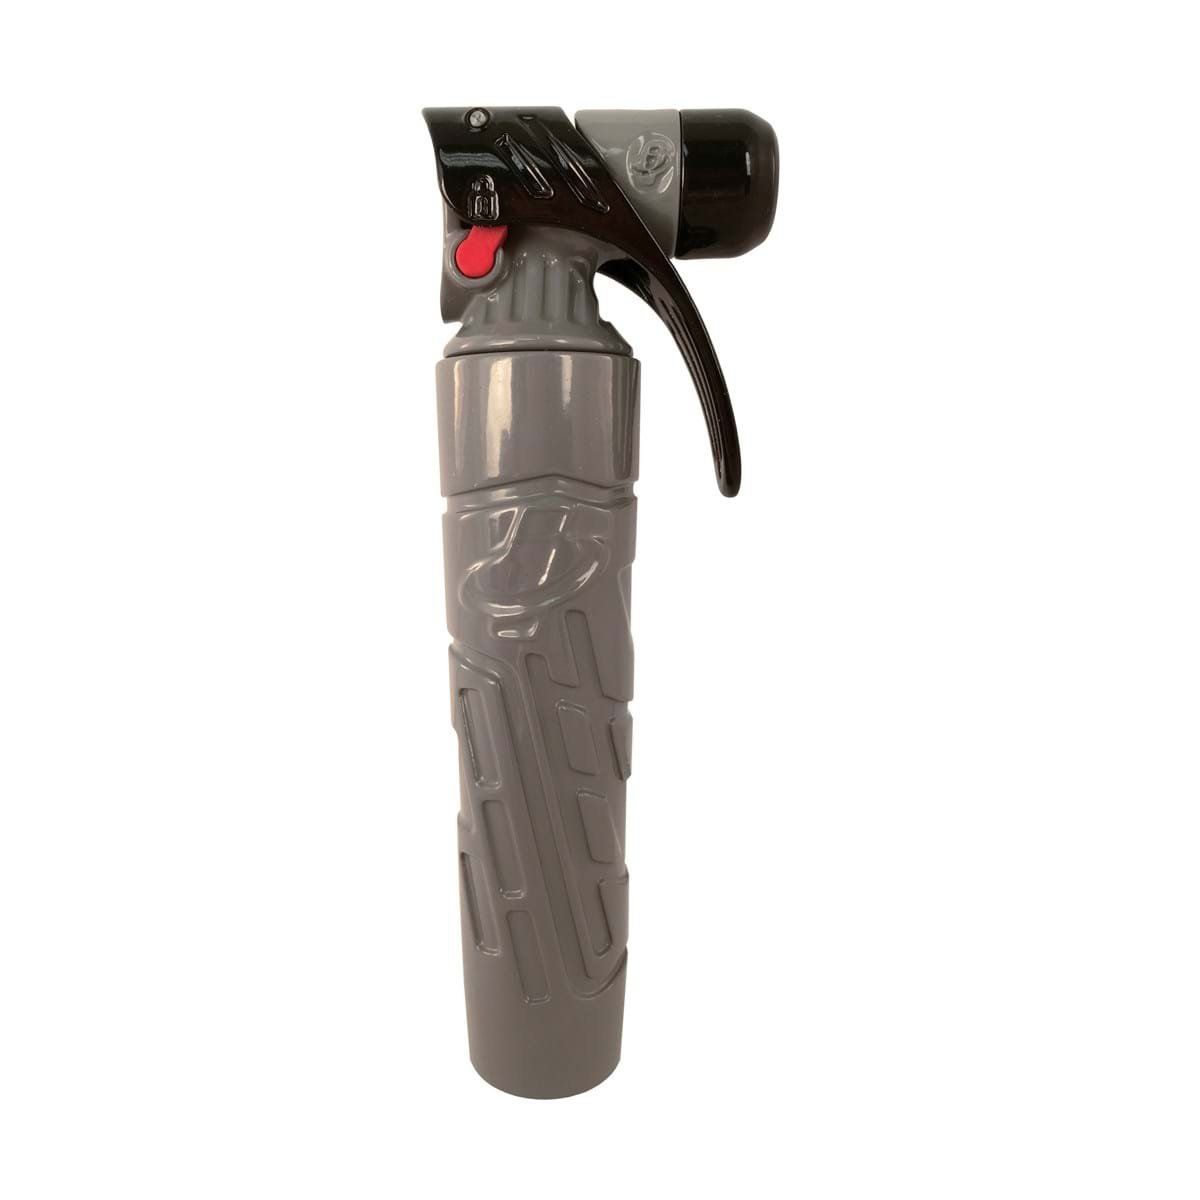 Off-the-shelf CO2 inflator used in conjunction with the Discreet Ballistics PopStop.